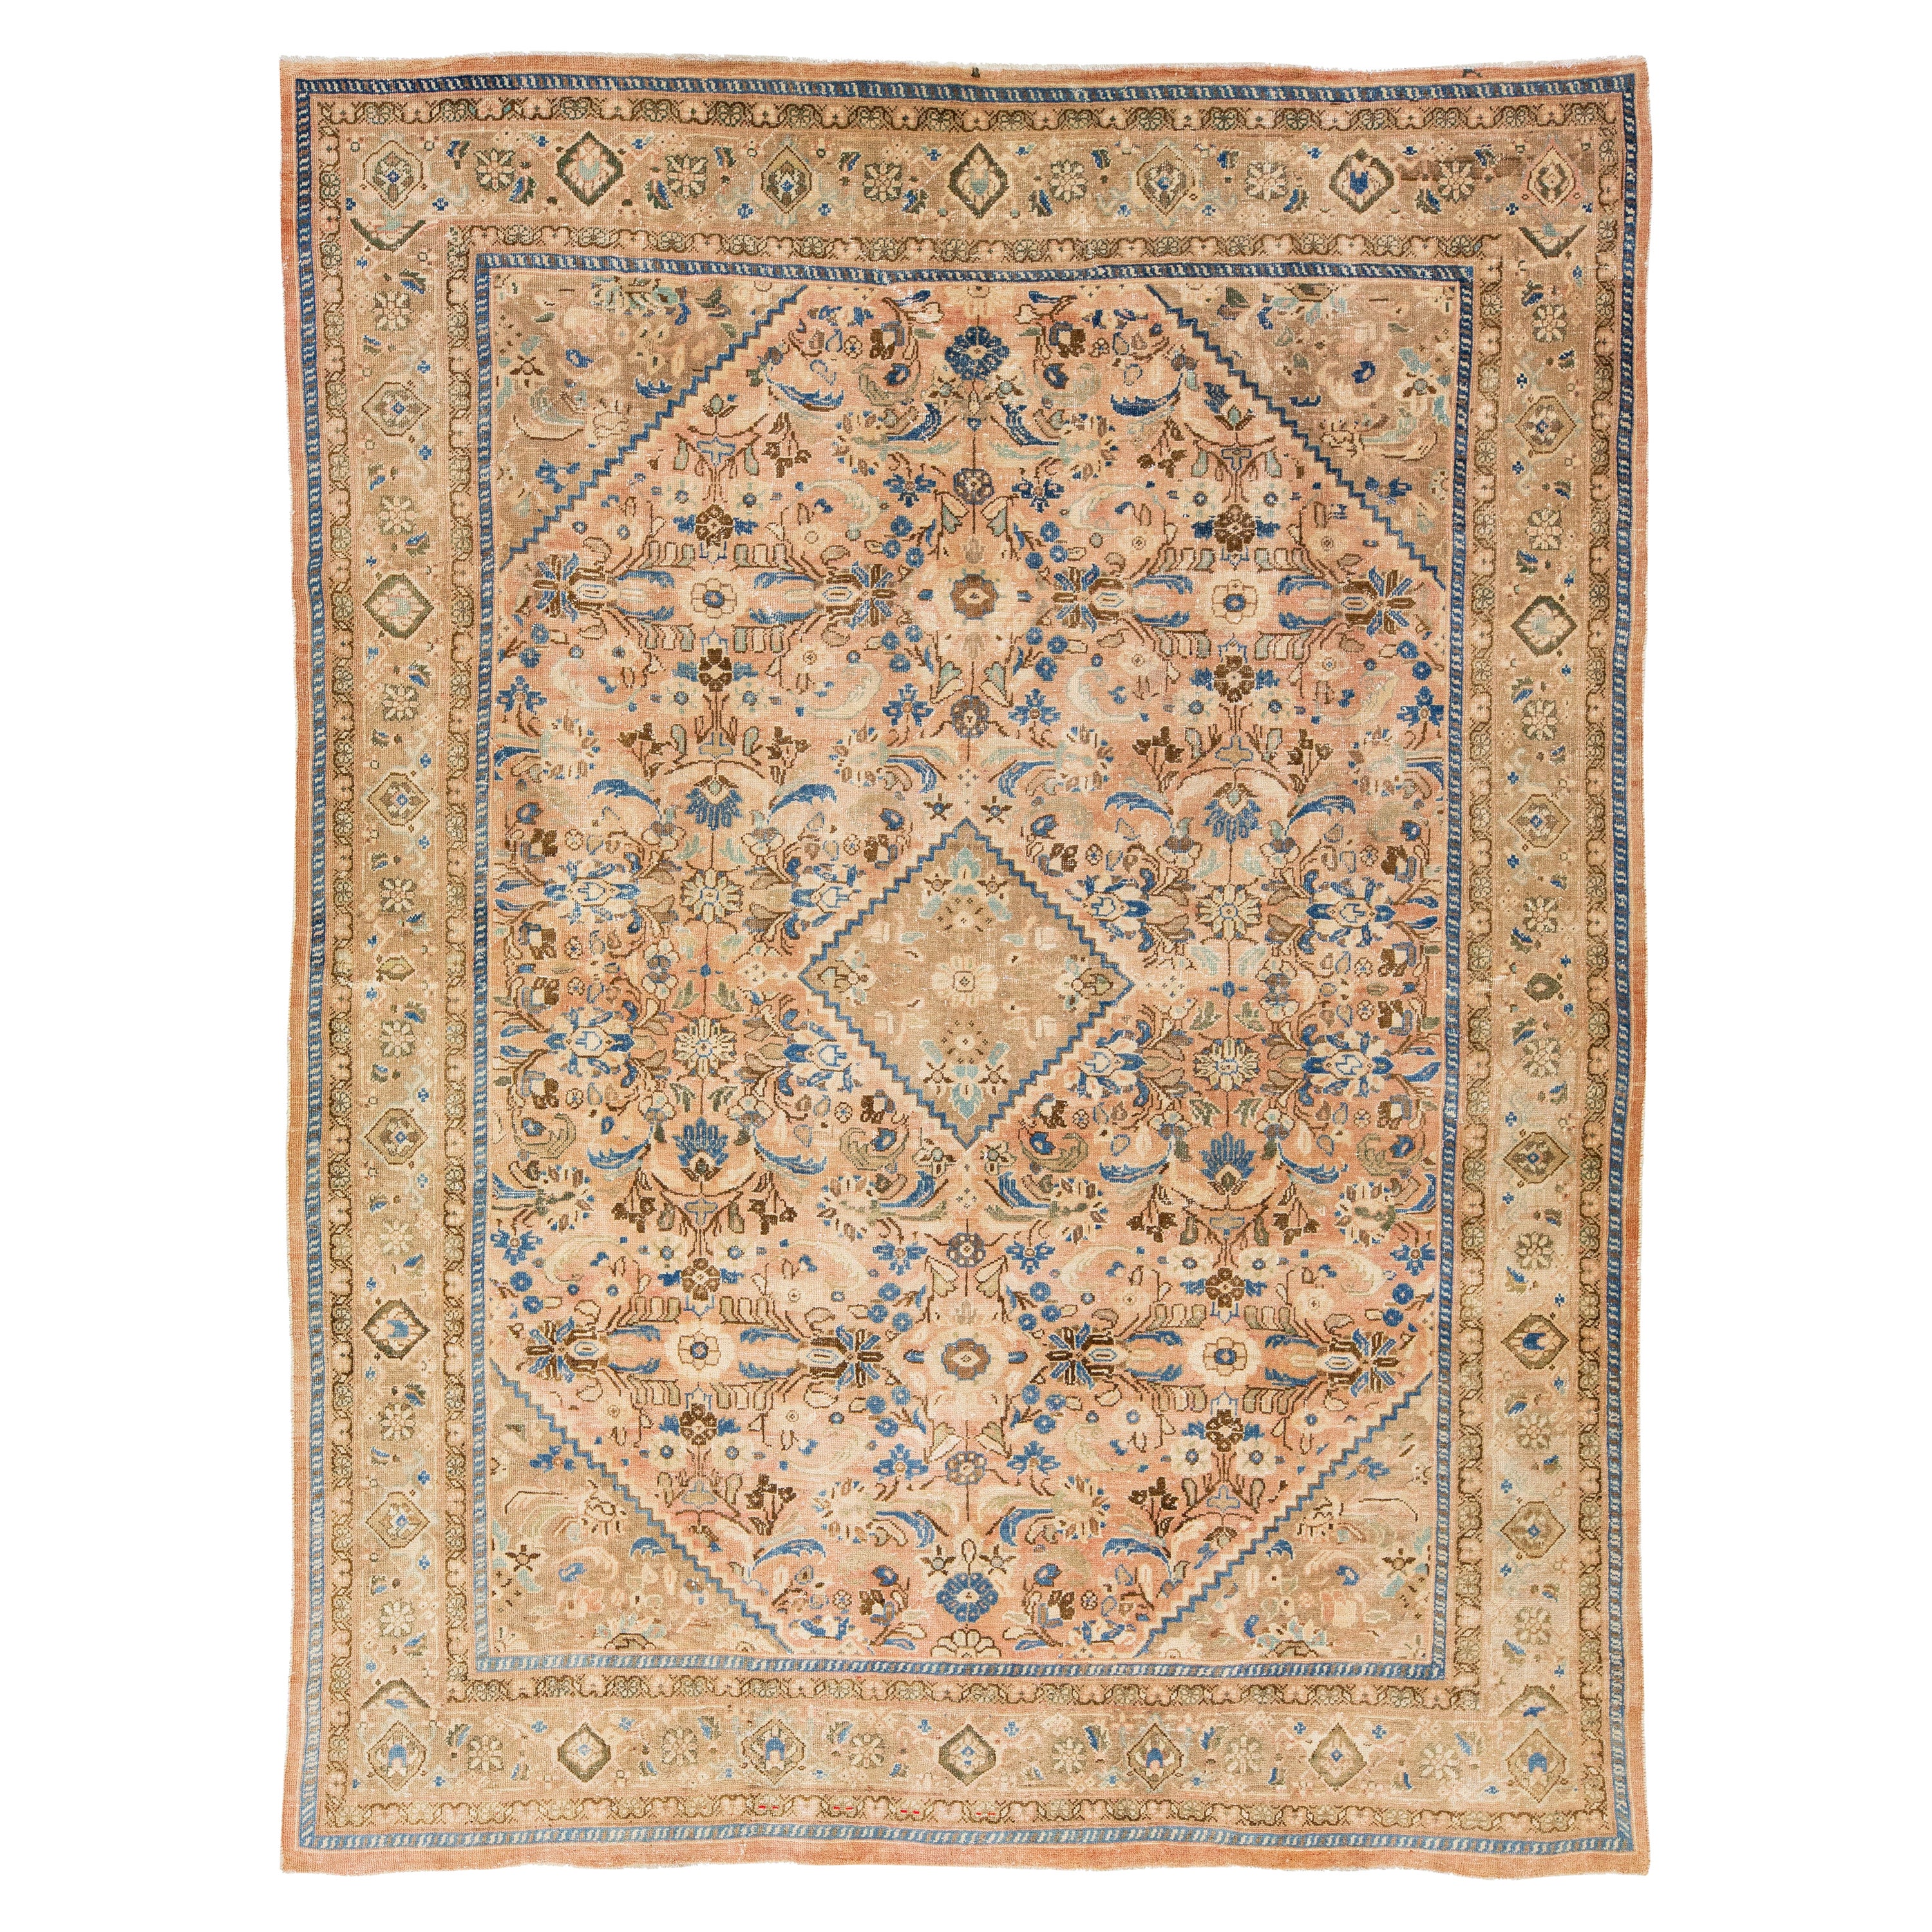 Handmade Persian Mahal Peach Wool Rug Featuring an Allover Floral Motif For Sale